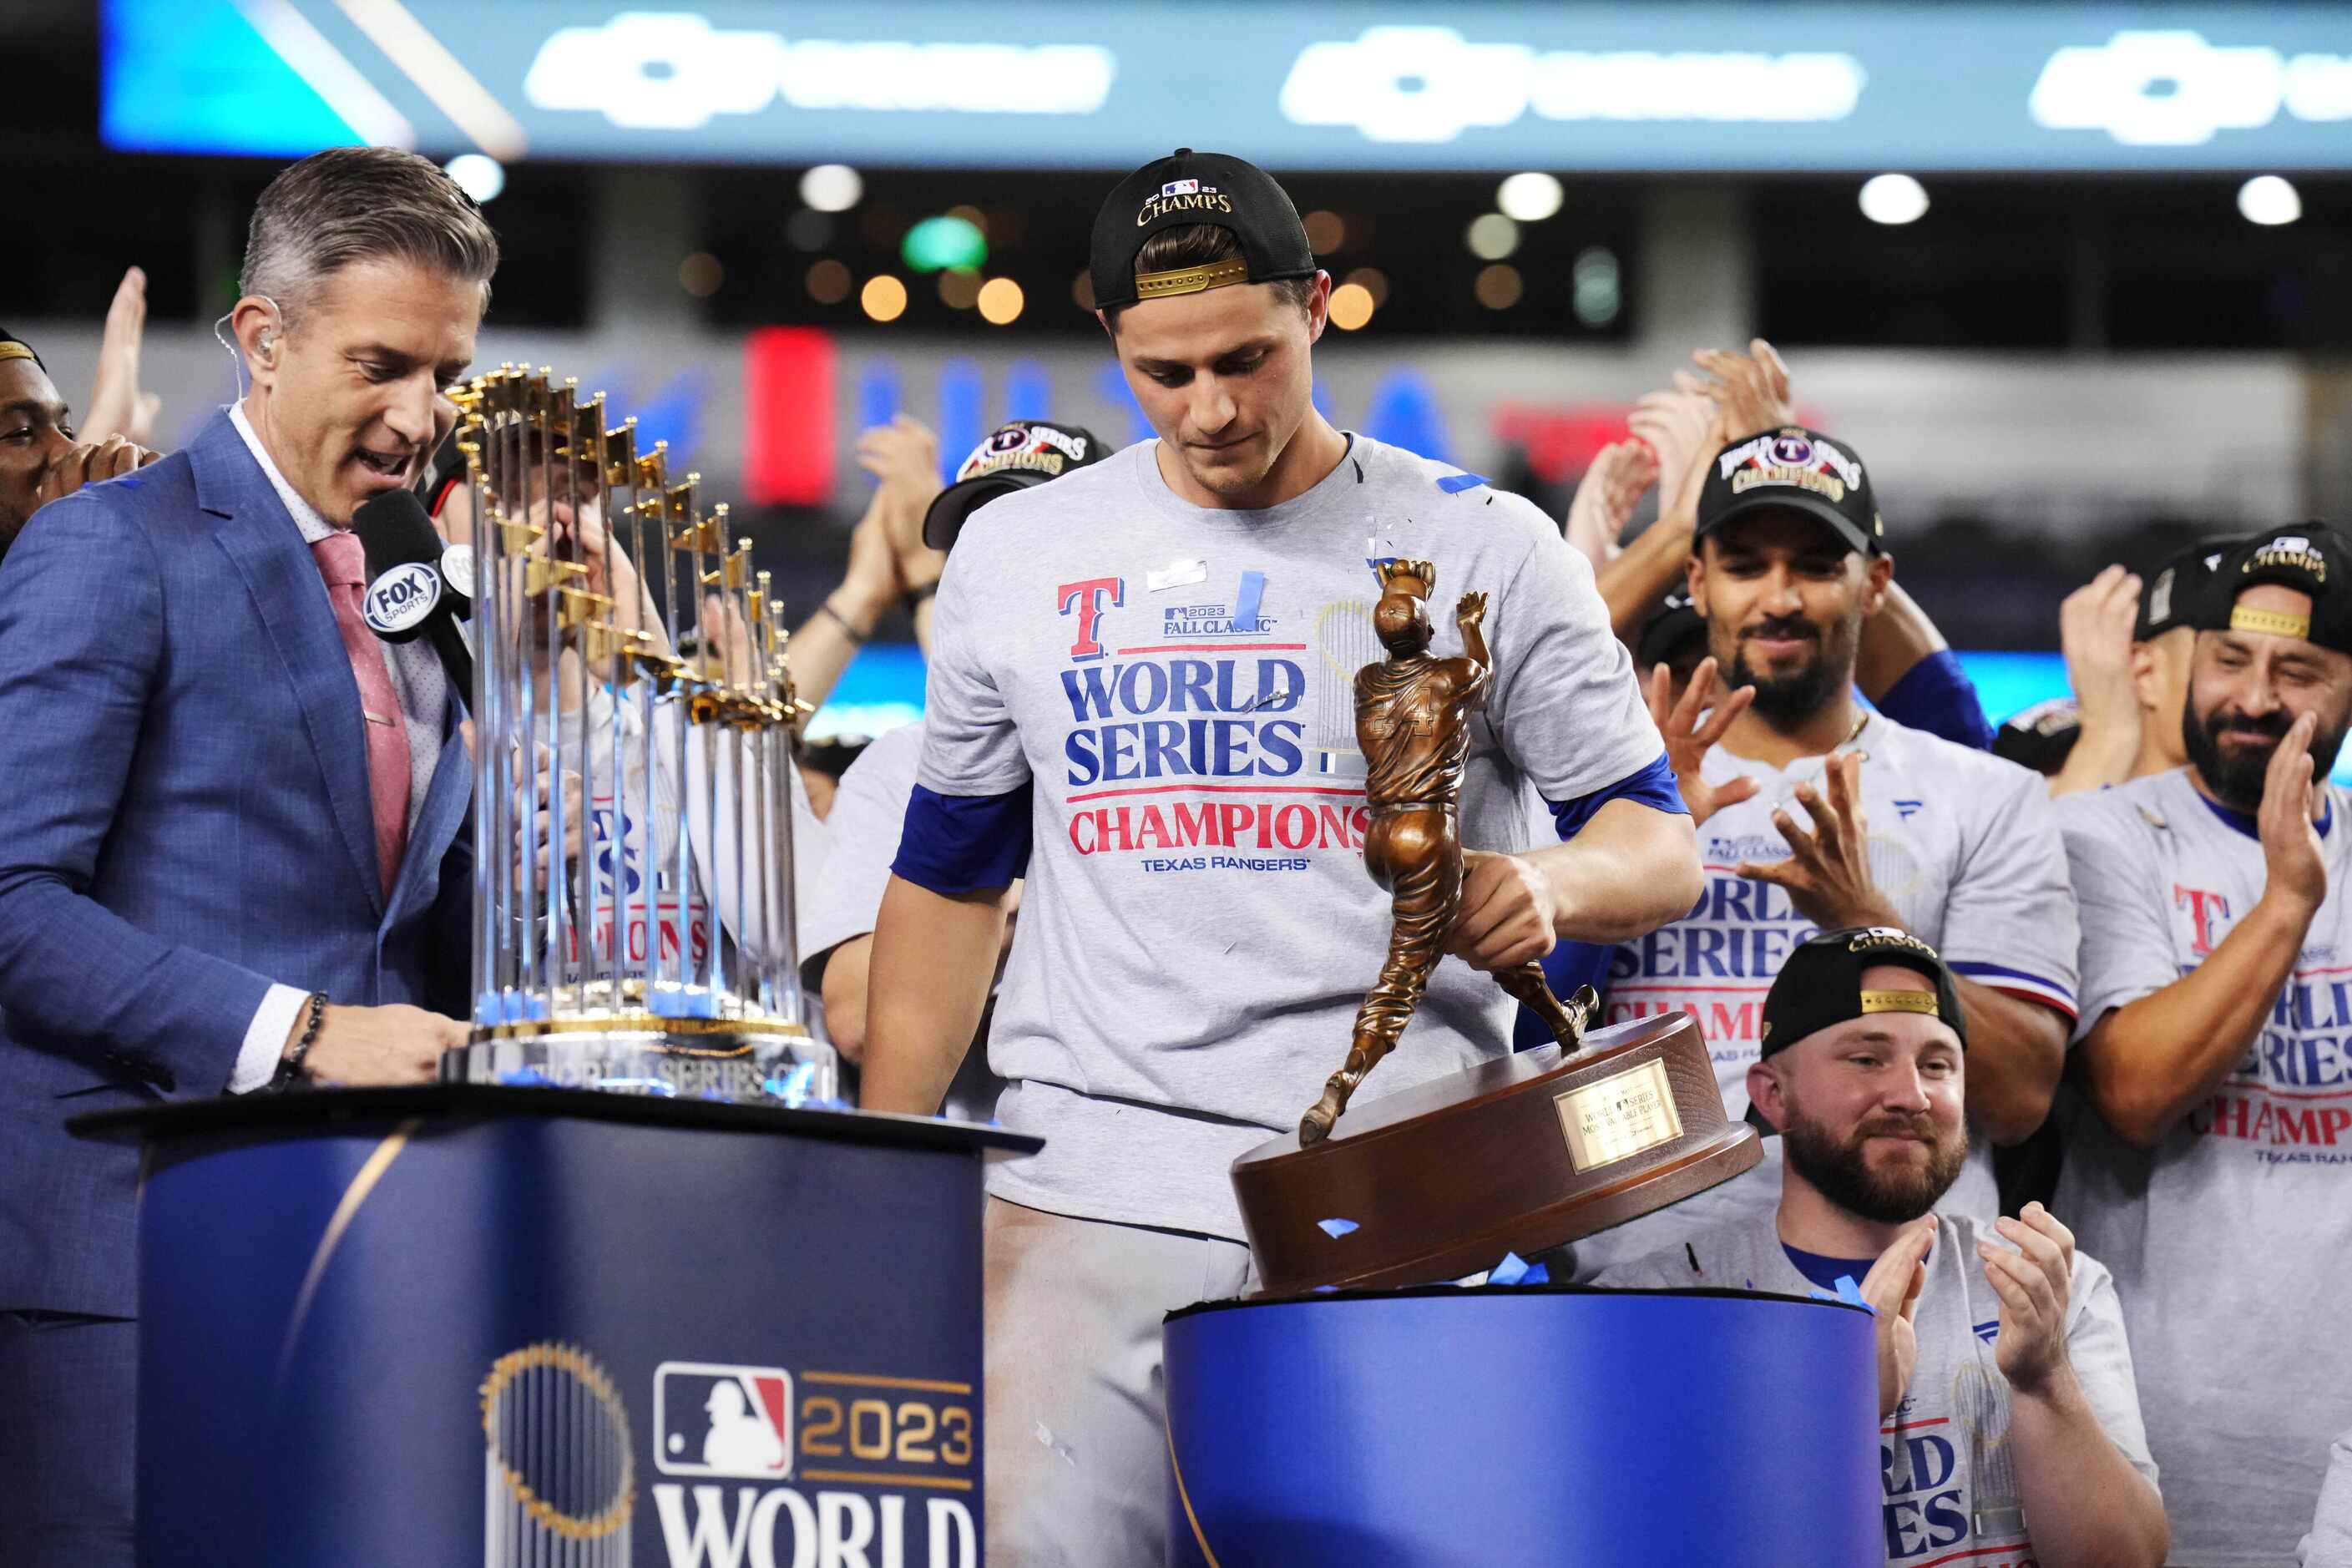 Texas Rangers shortstop Corey Seager celebrates winning MVP
of the World Series after...